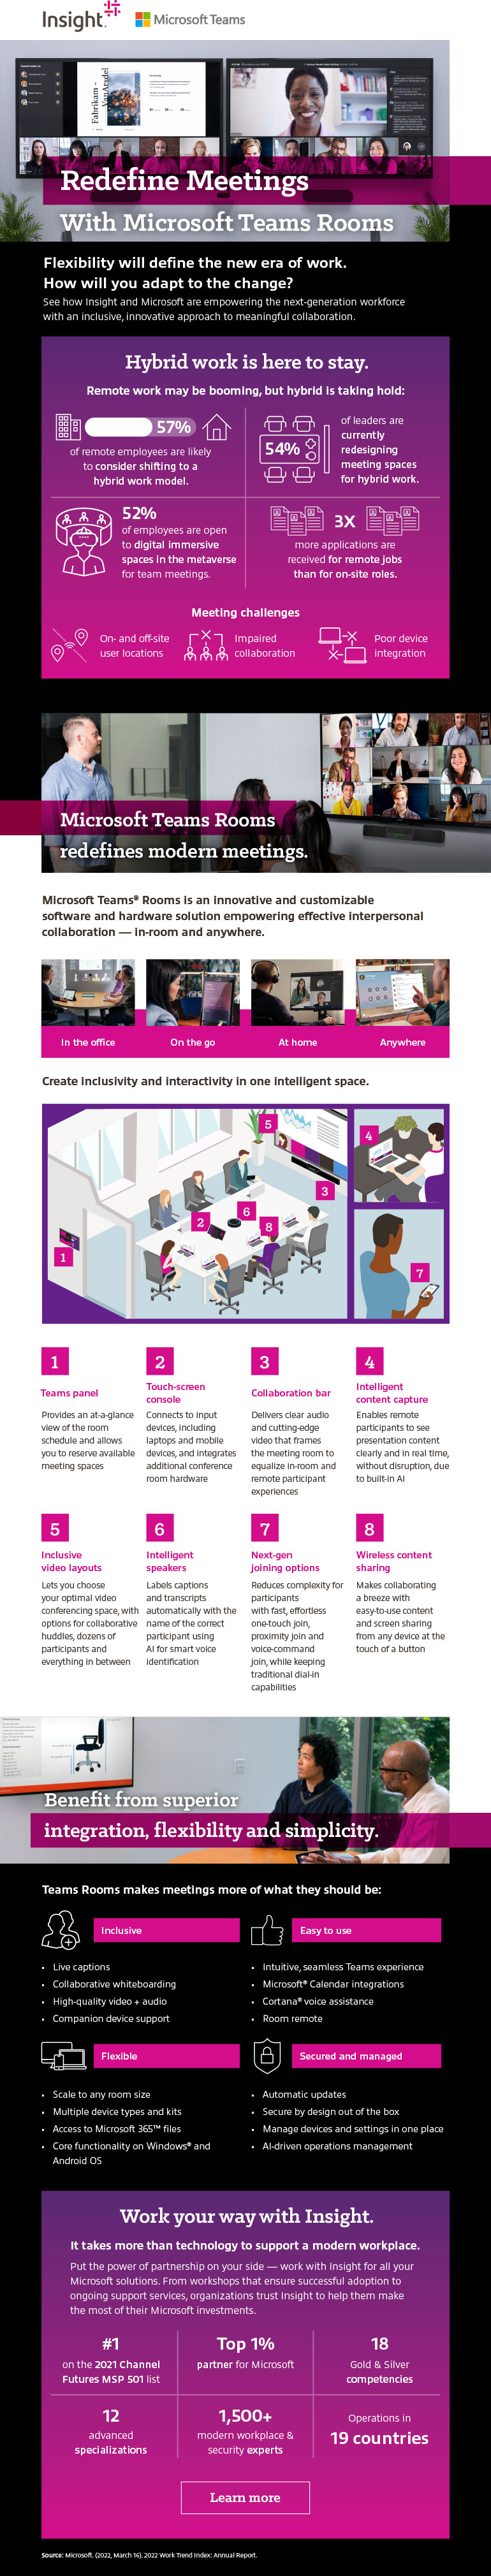 Redefine Meetings with Microsoft Teams Rooms infographic